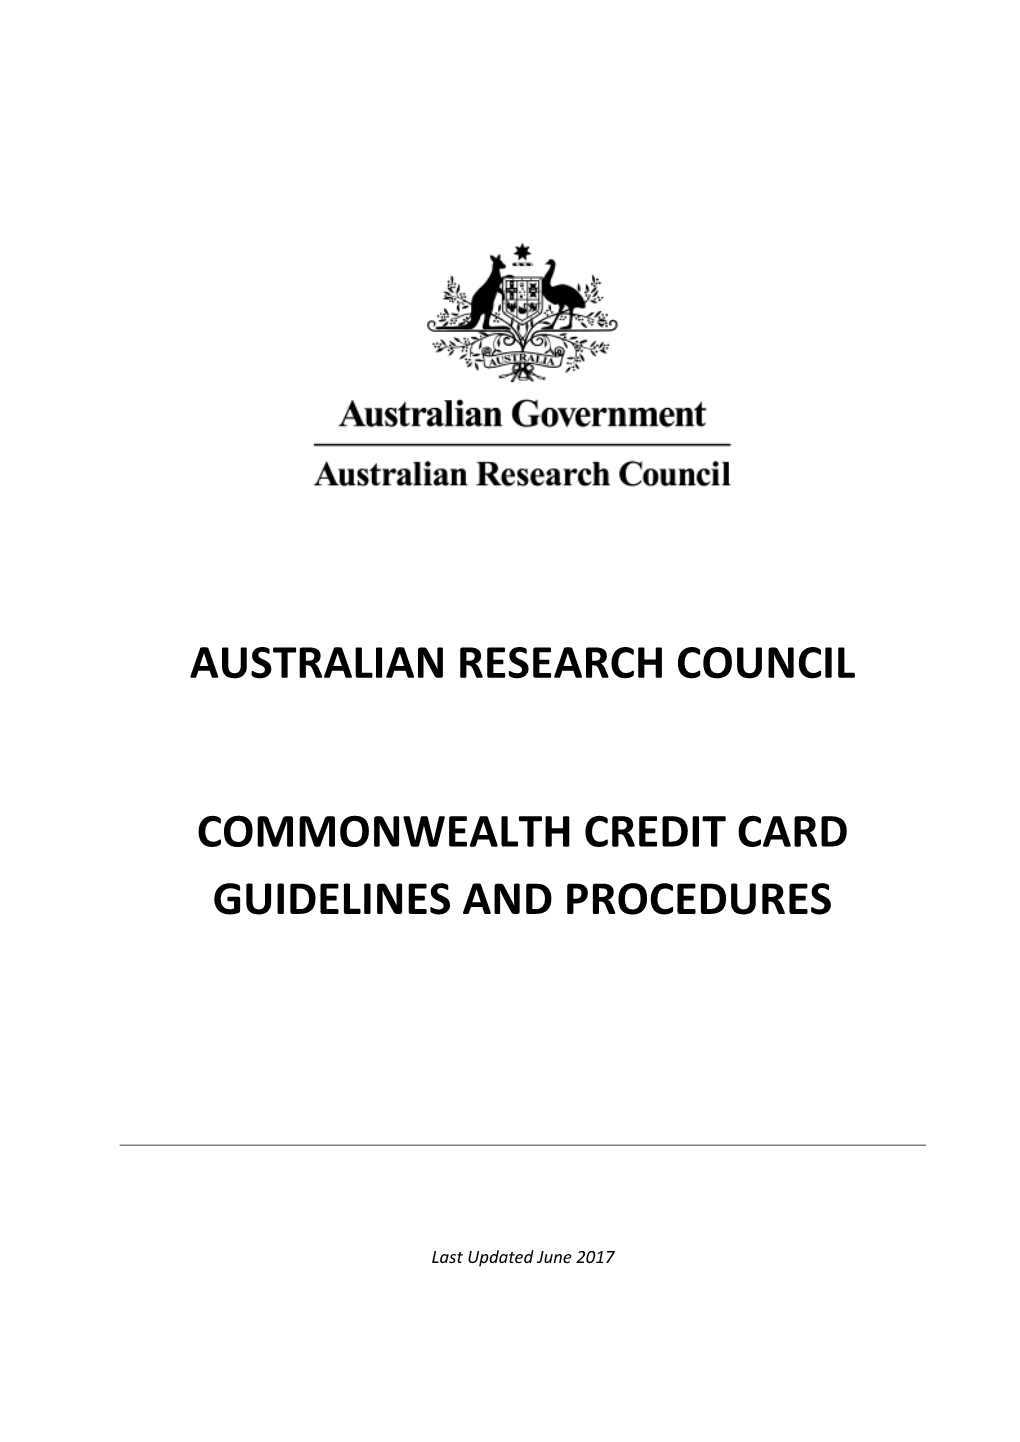 Commonwealth Credit Card Guidelines and Procedures